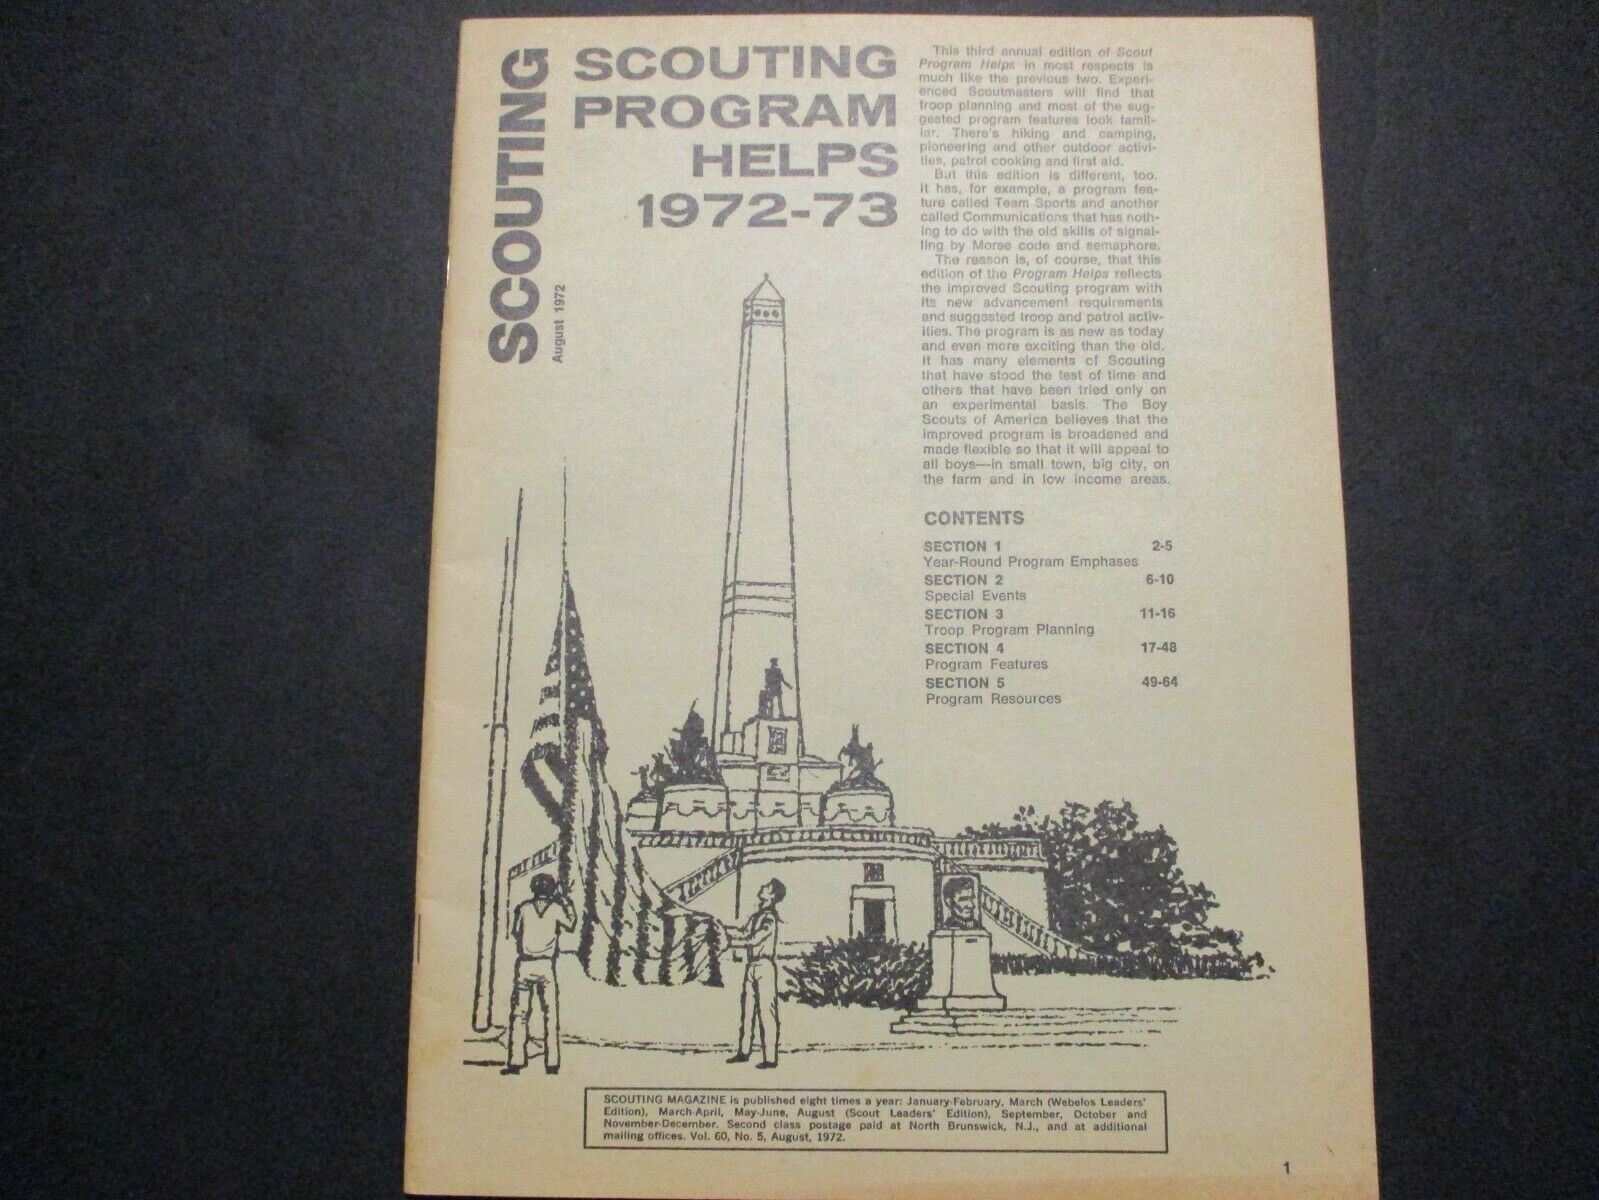 August 1972 Scouting Program Helps 1972-73